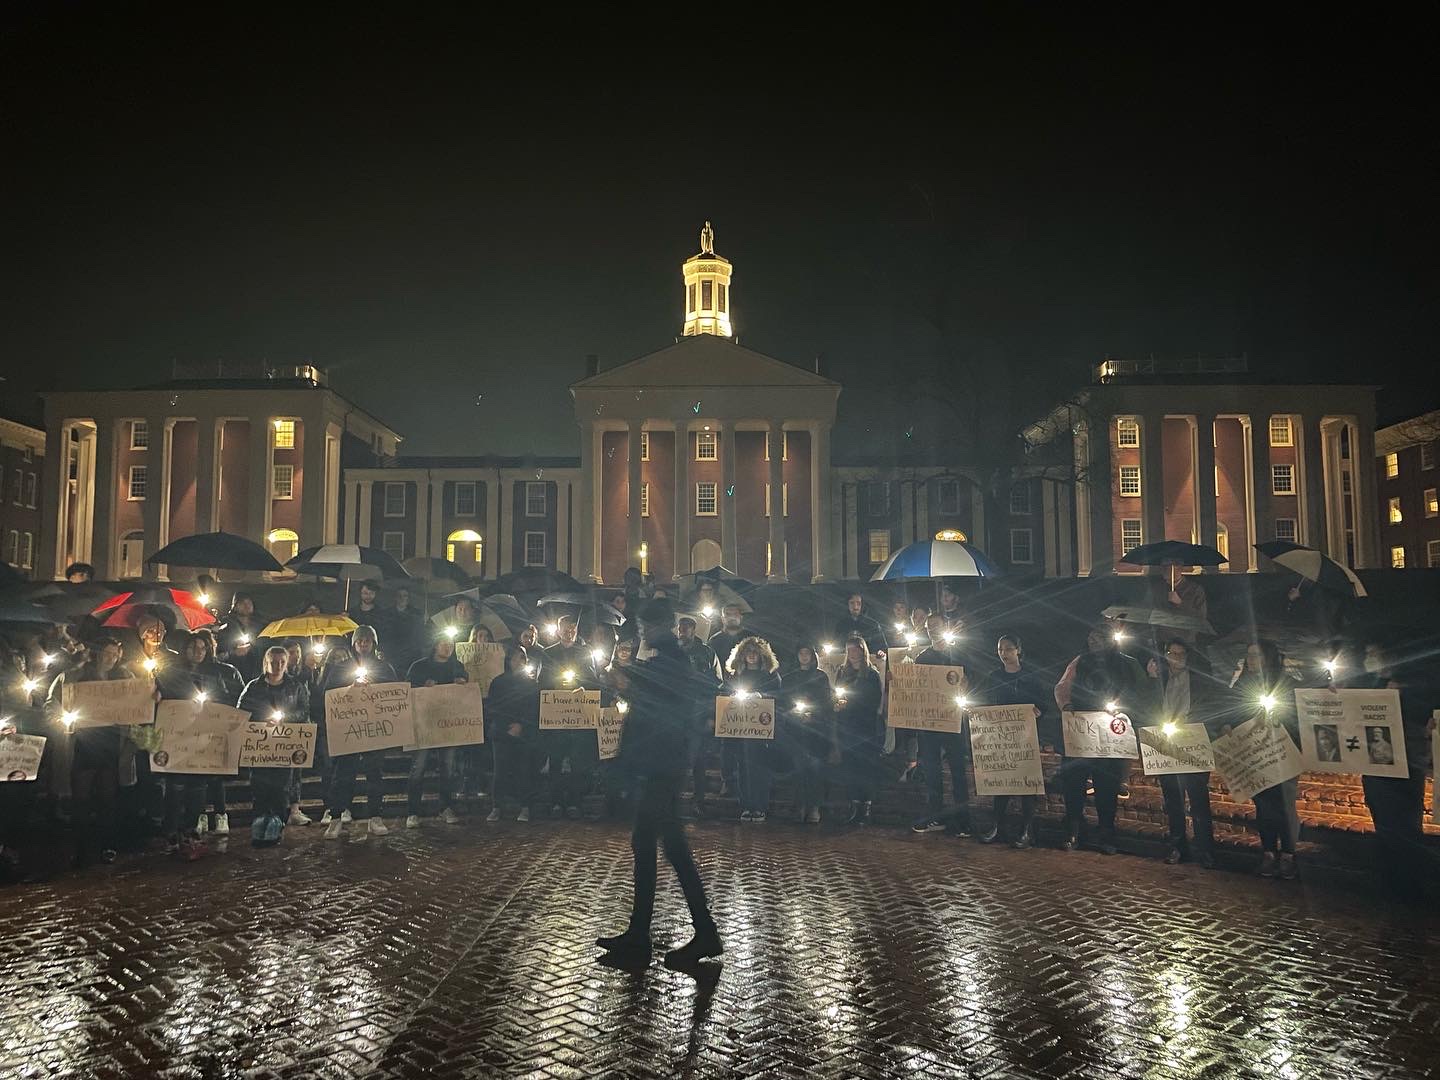 A crowd of people stand in a circle holding flashlights and signs. Behind them are lit up buildings with tall columns.